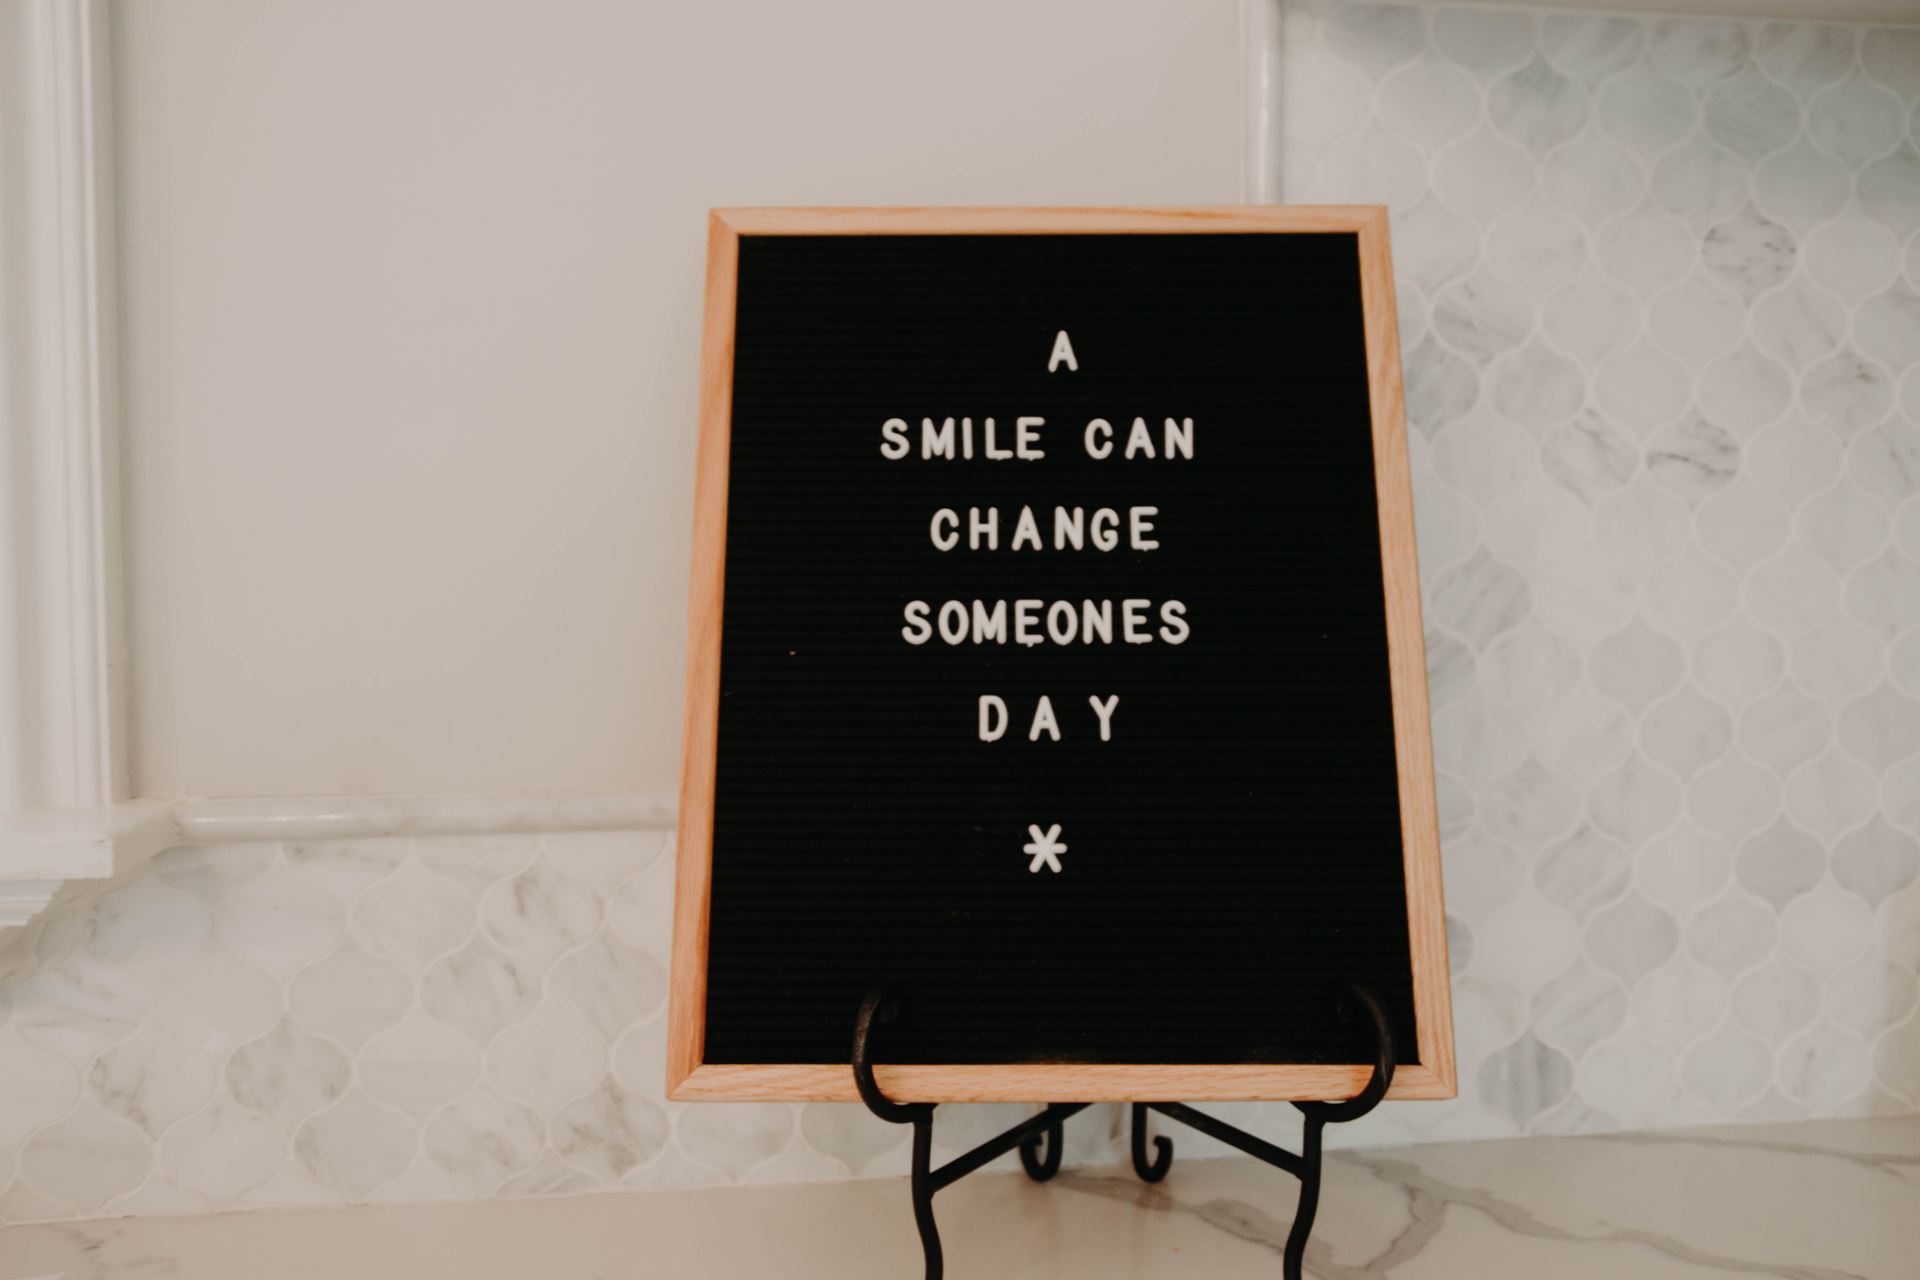 A black sign shows white lettering to read 'A smile can change someone's day'